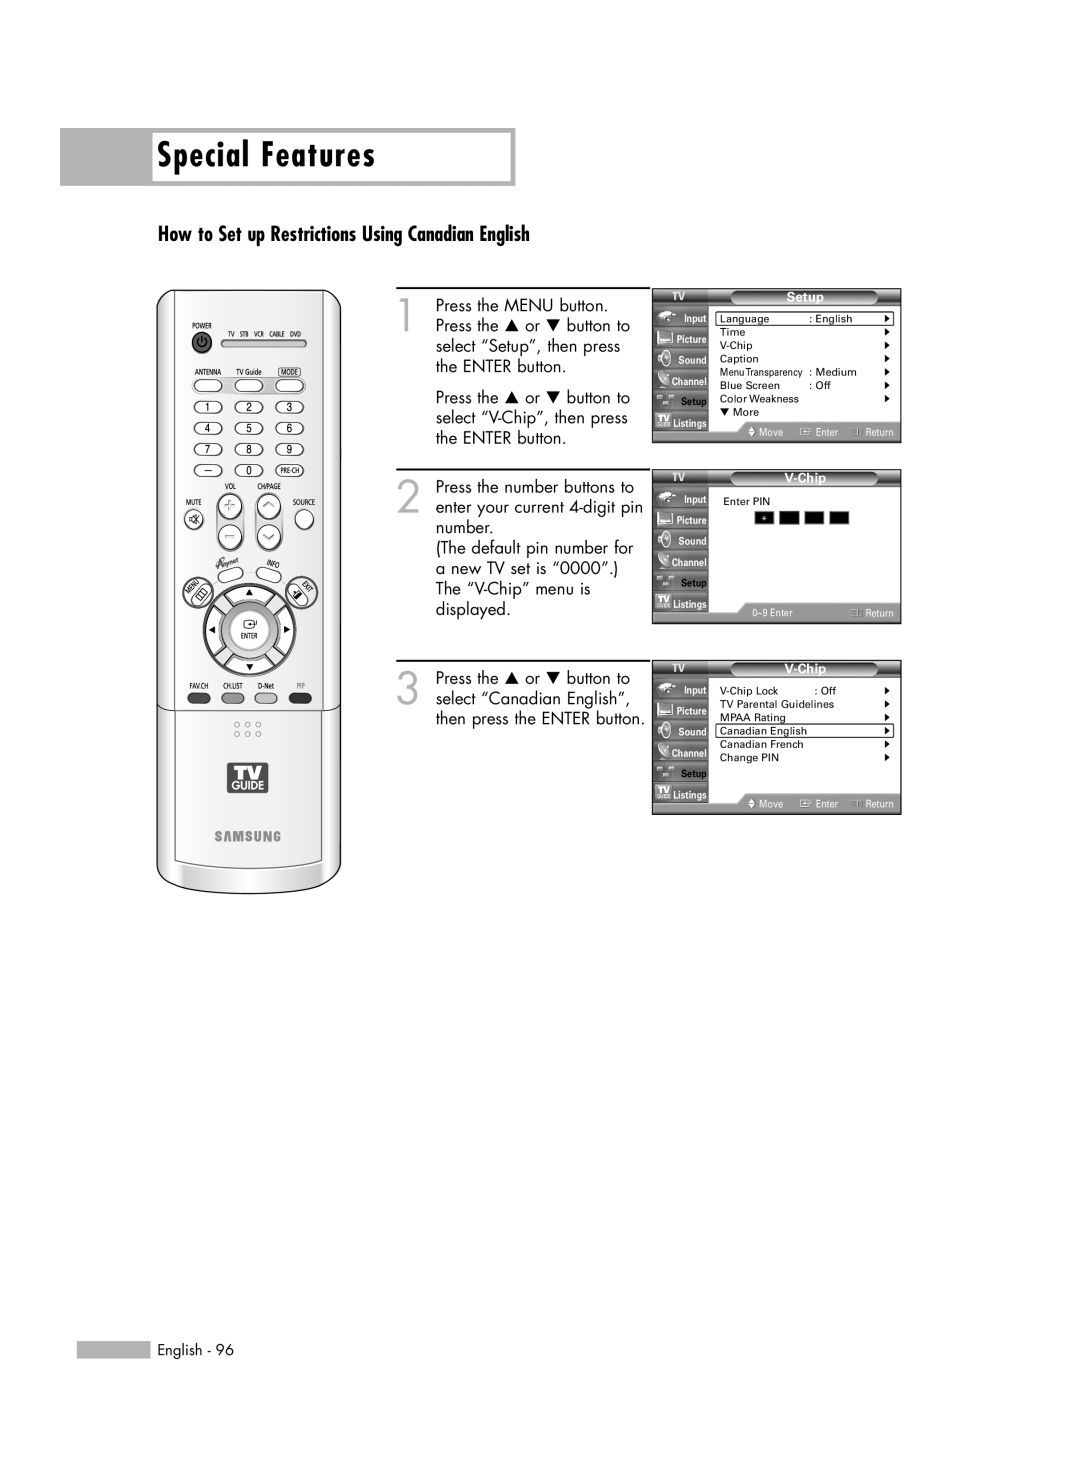 Samsung HL-R6178W, HL-R5678W, HL-R7178W manual Special Features, How to Set up Restrictions Using Canadian English 